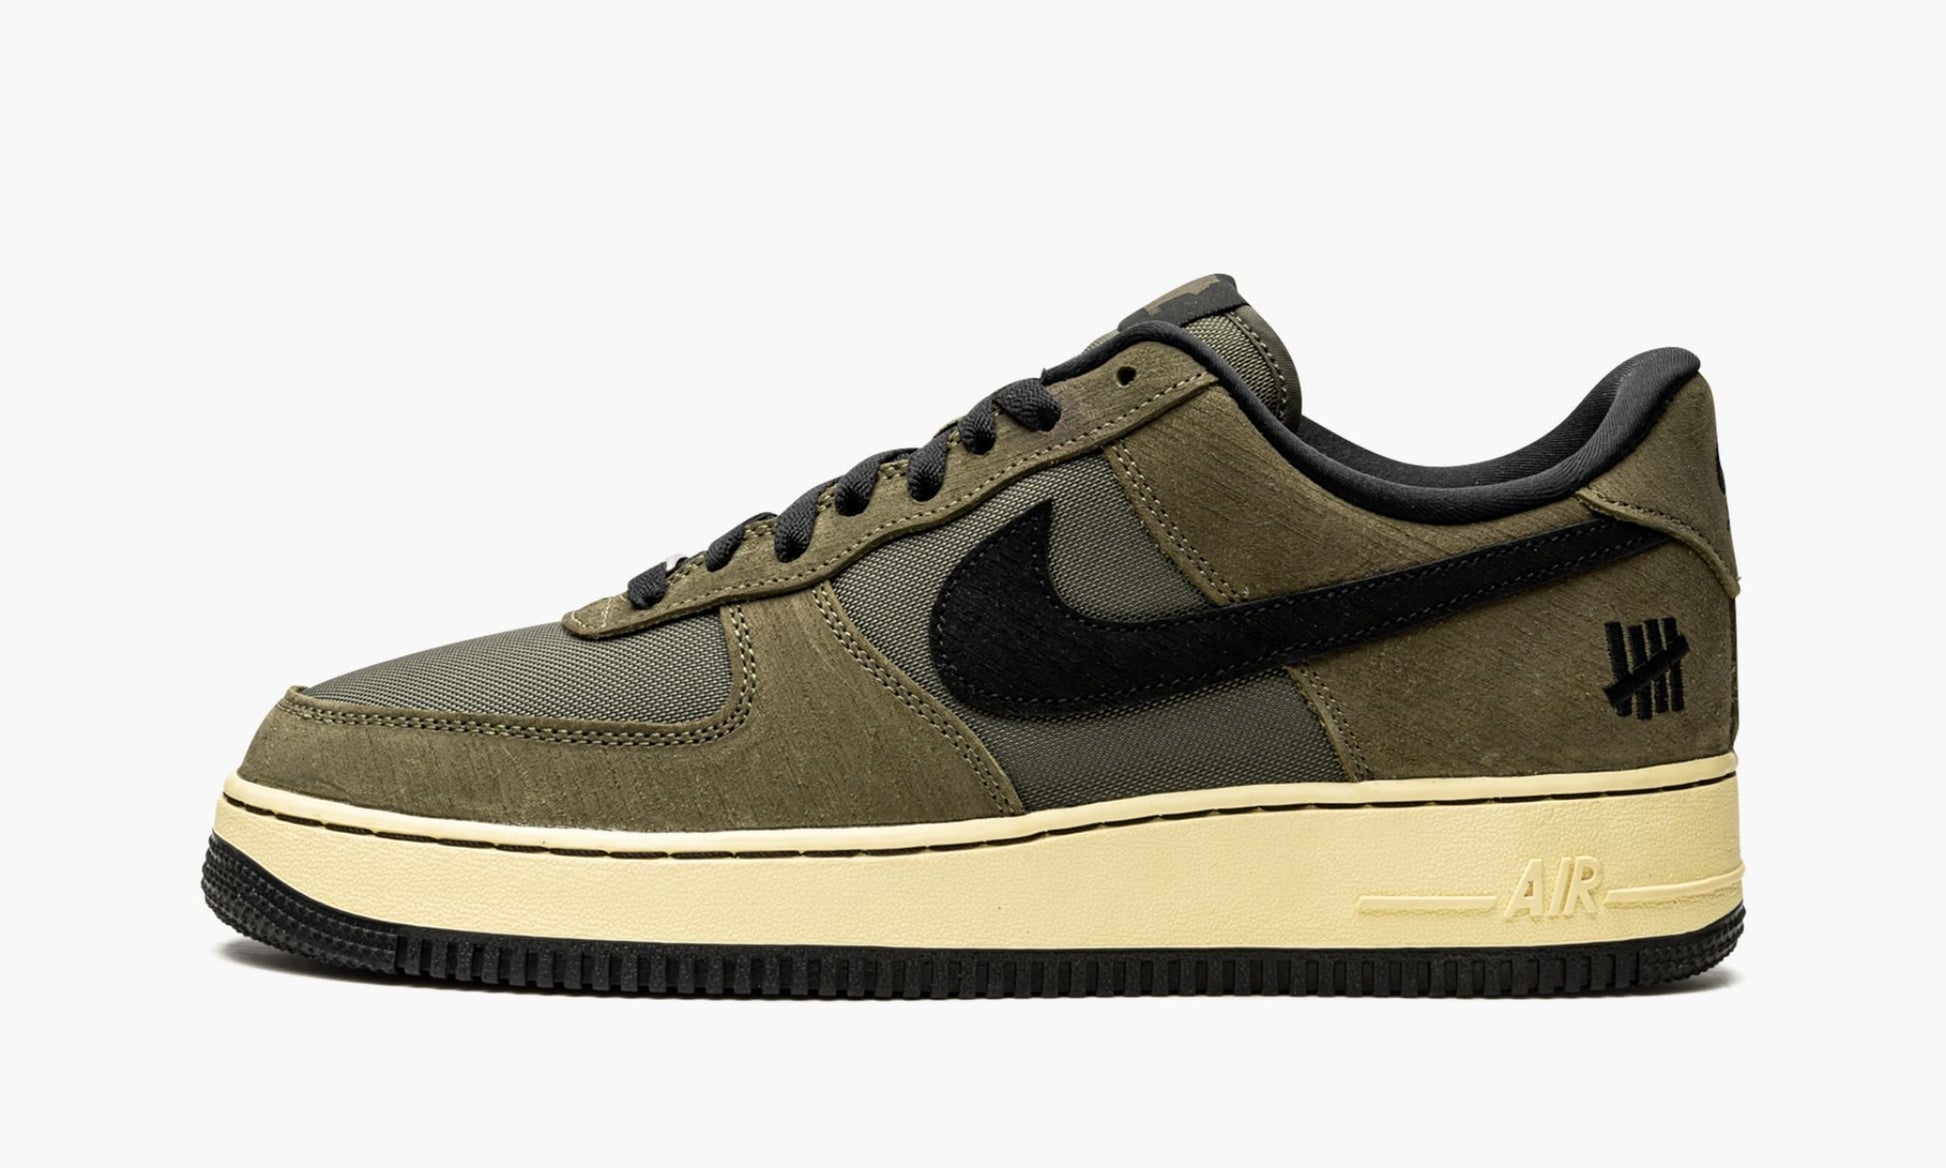 Air Force 1 Low SP "Undefeated - Ballistic"